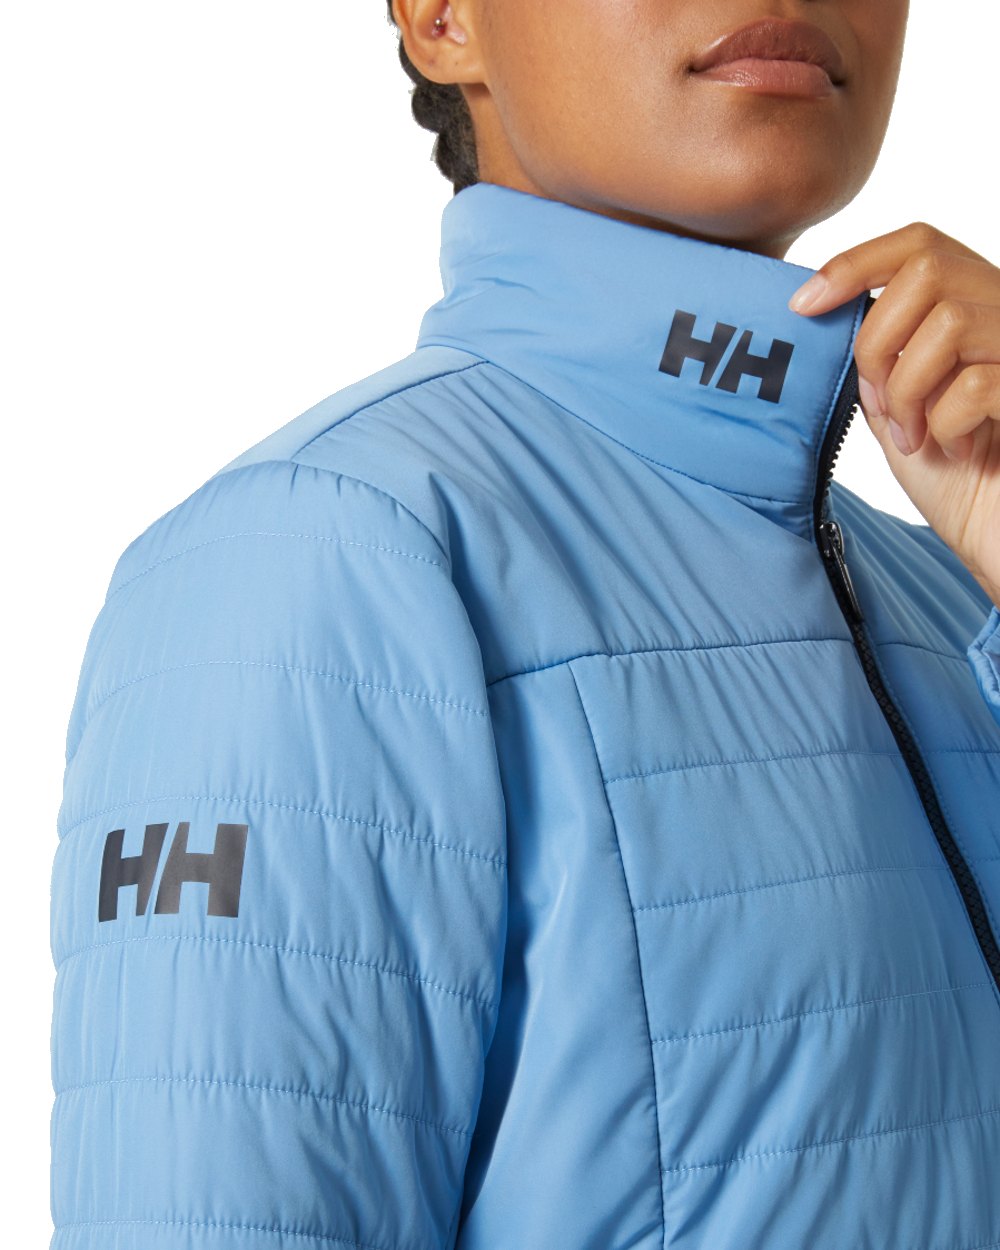 Helly Hansen Womens Crew Insulated Sailing Jacket 2.0 in Bright Blue 